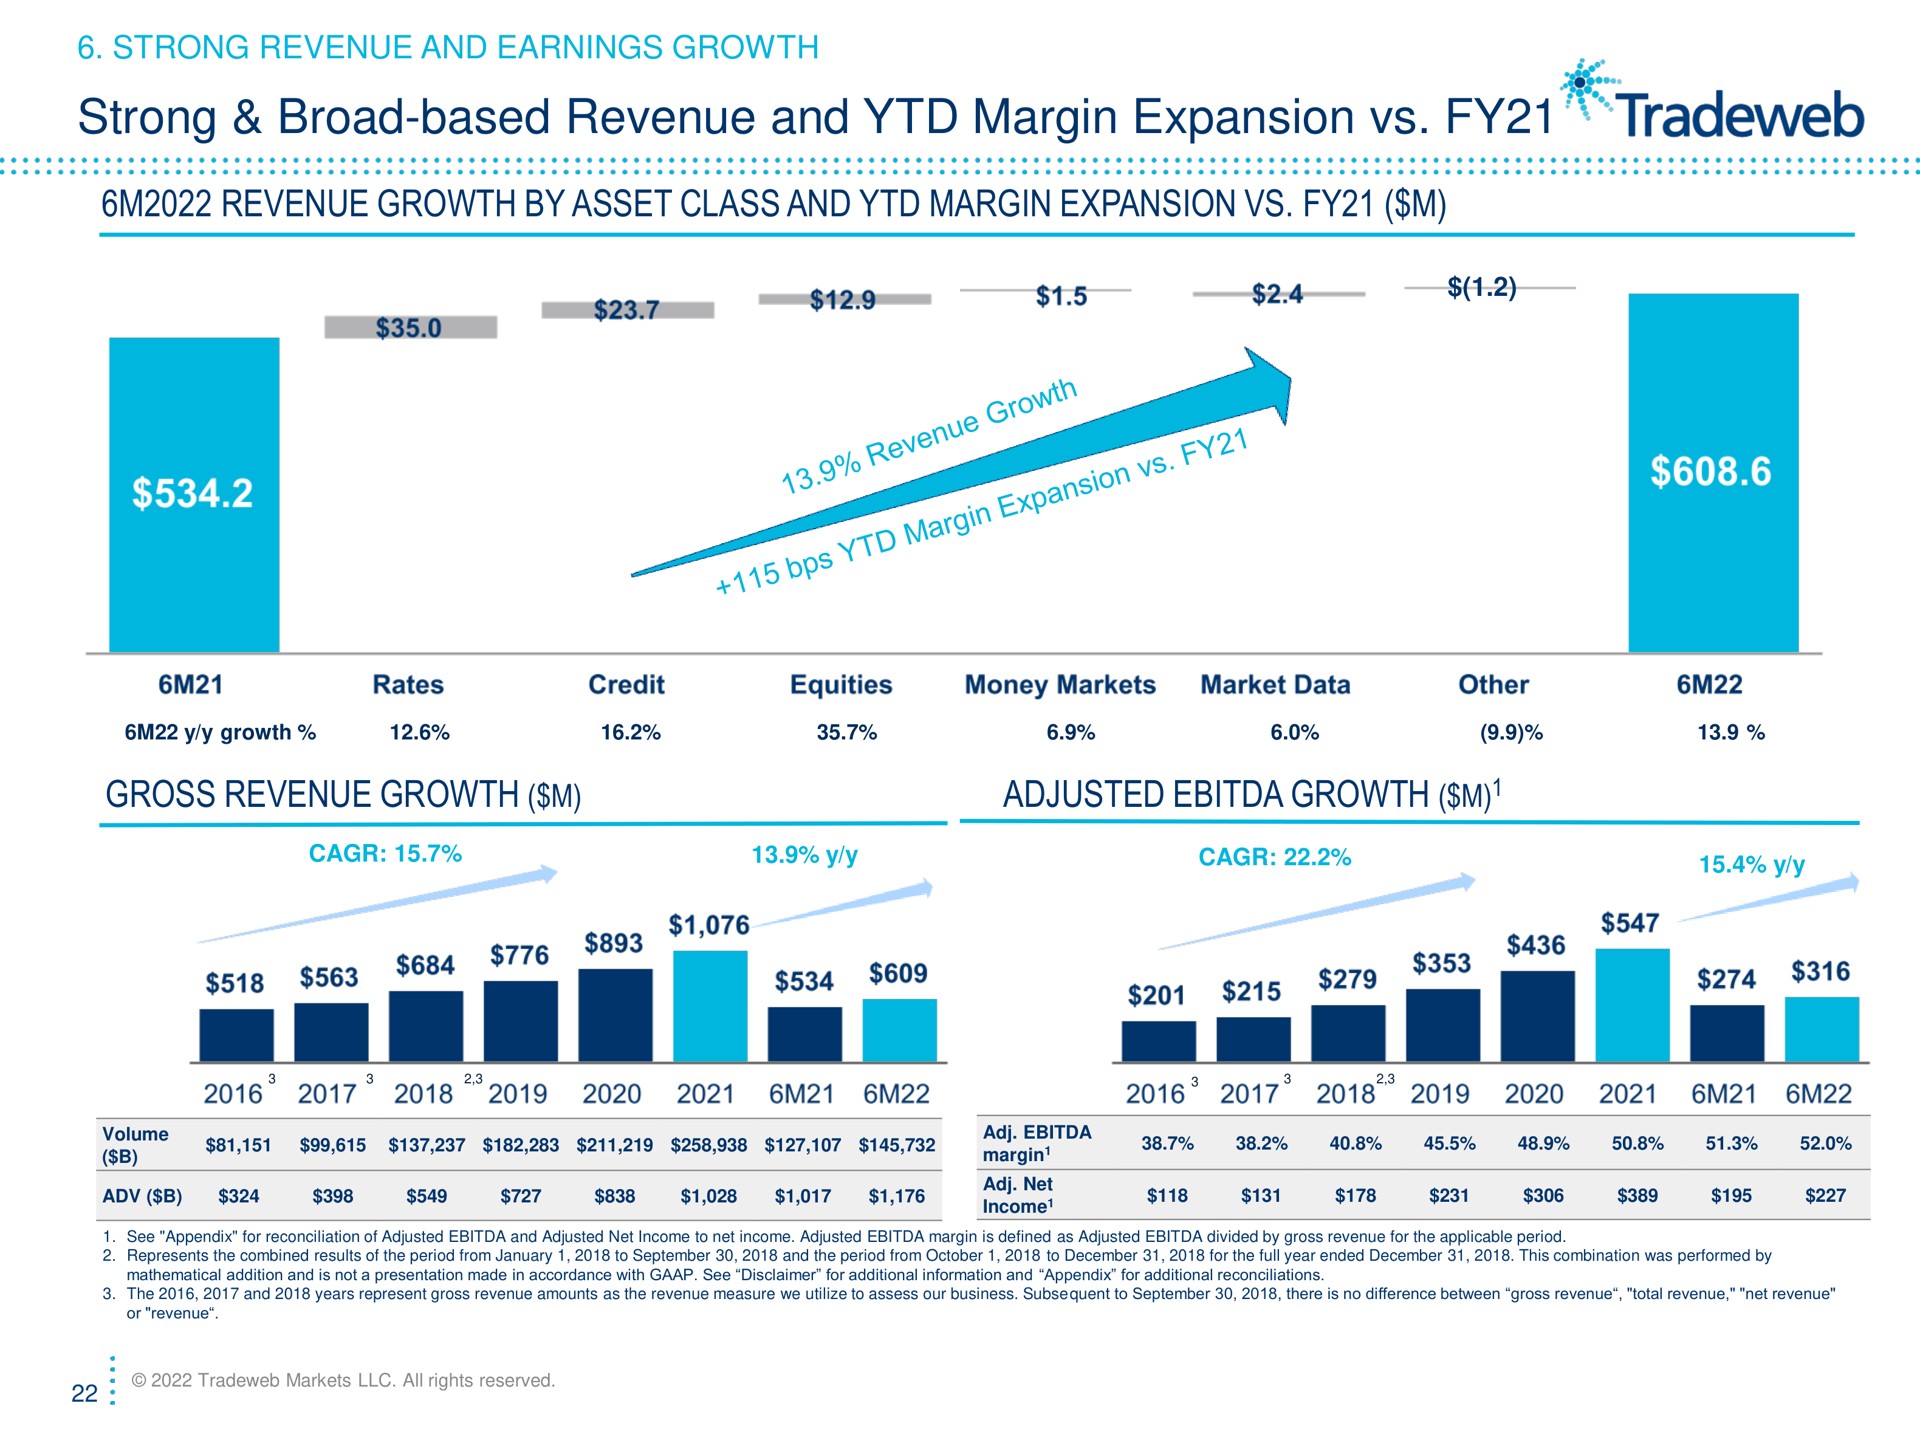 strong broad based revenue and margin expansion revenue growth by asset class and margin expansion gross revenue growth adjusted growth earnings i rates credit equities money markets market data other | Tradeweb